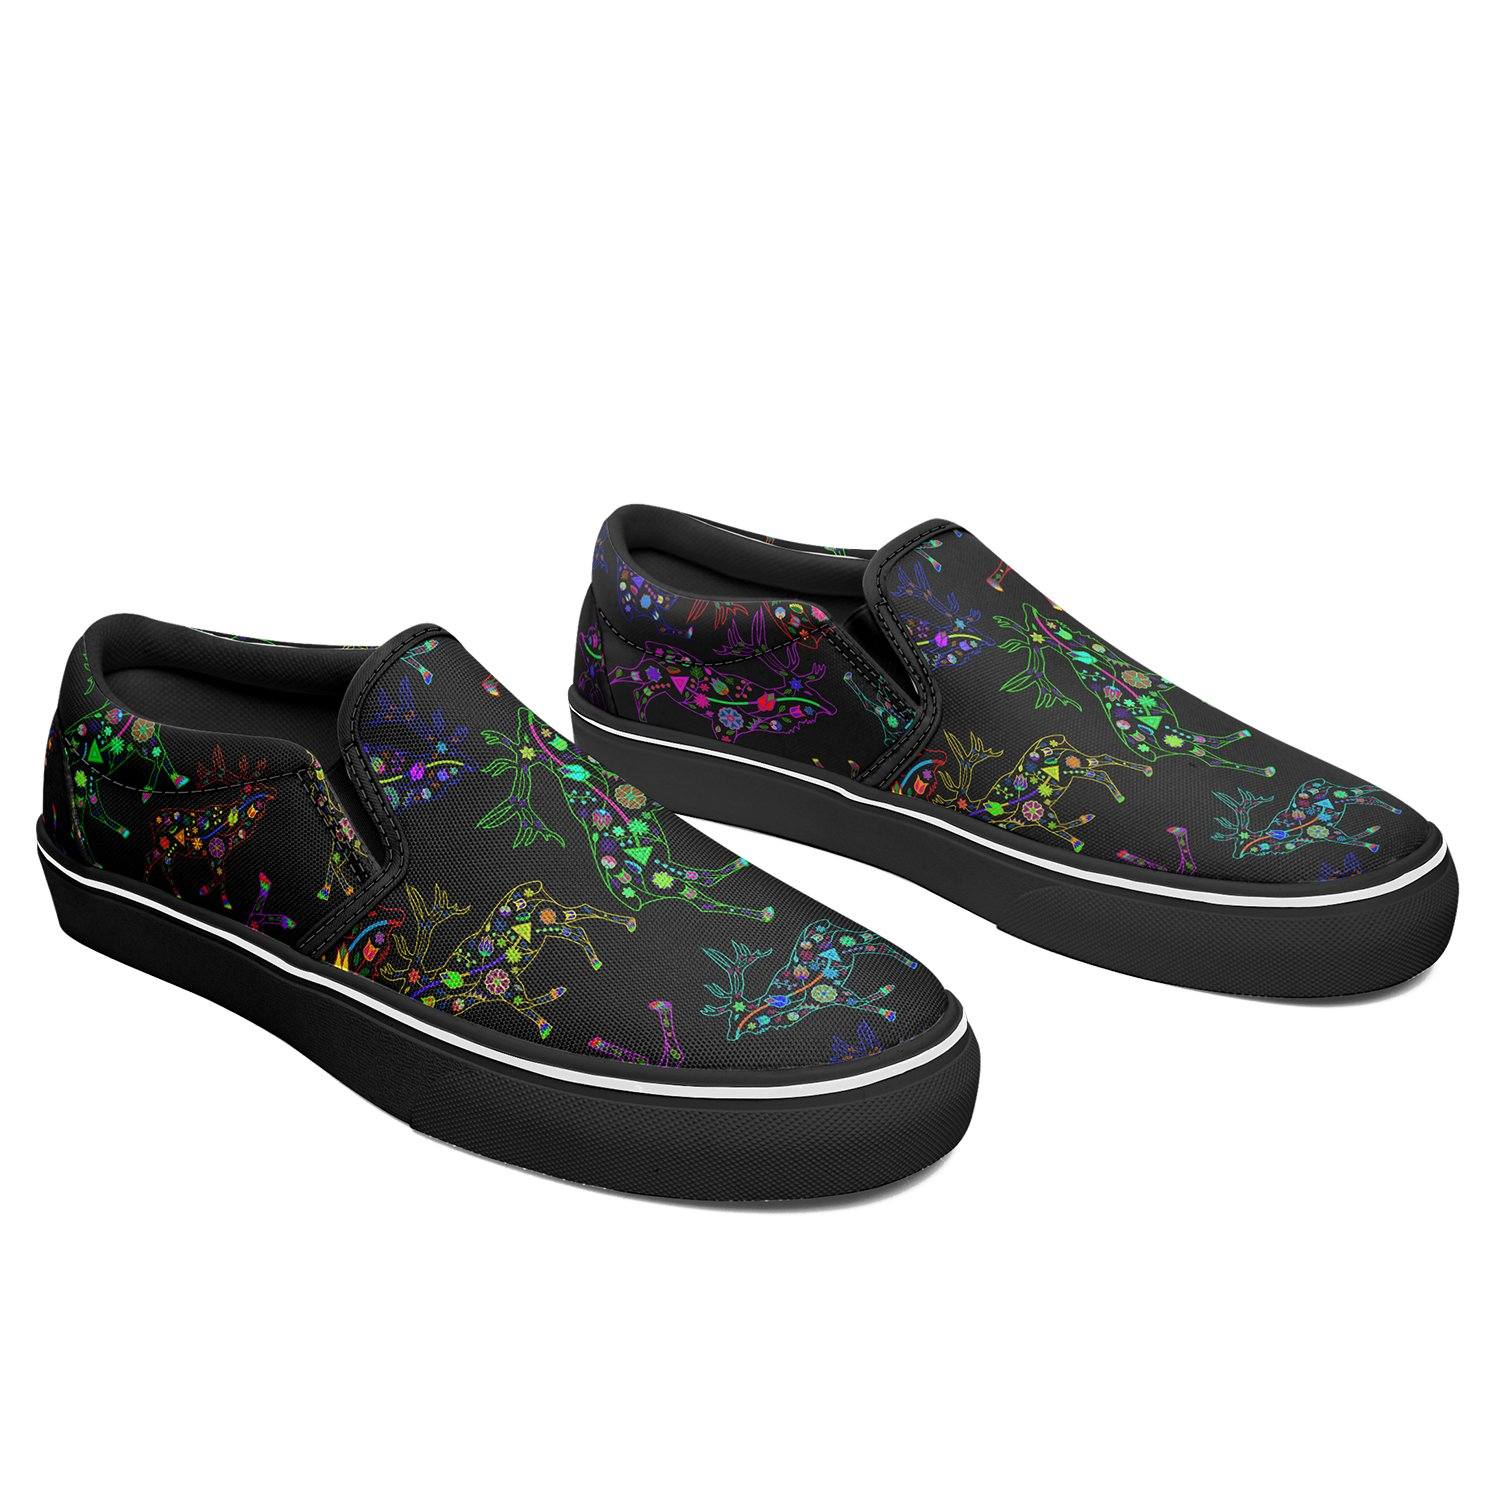 Floral Elk Otoyimm Canvas Slip On Shoes otoyimm Herman 